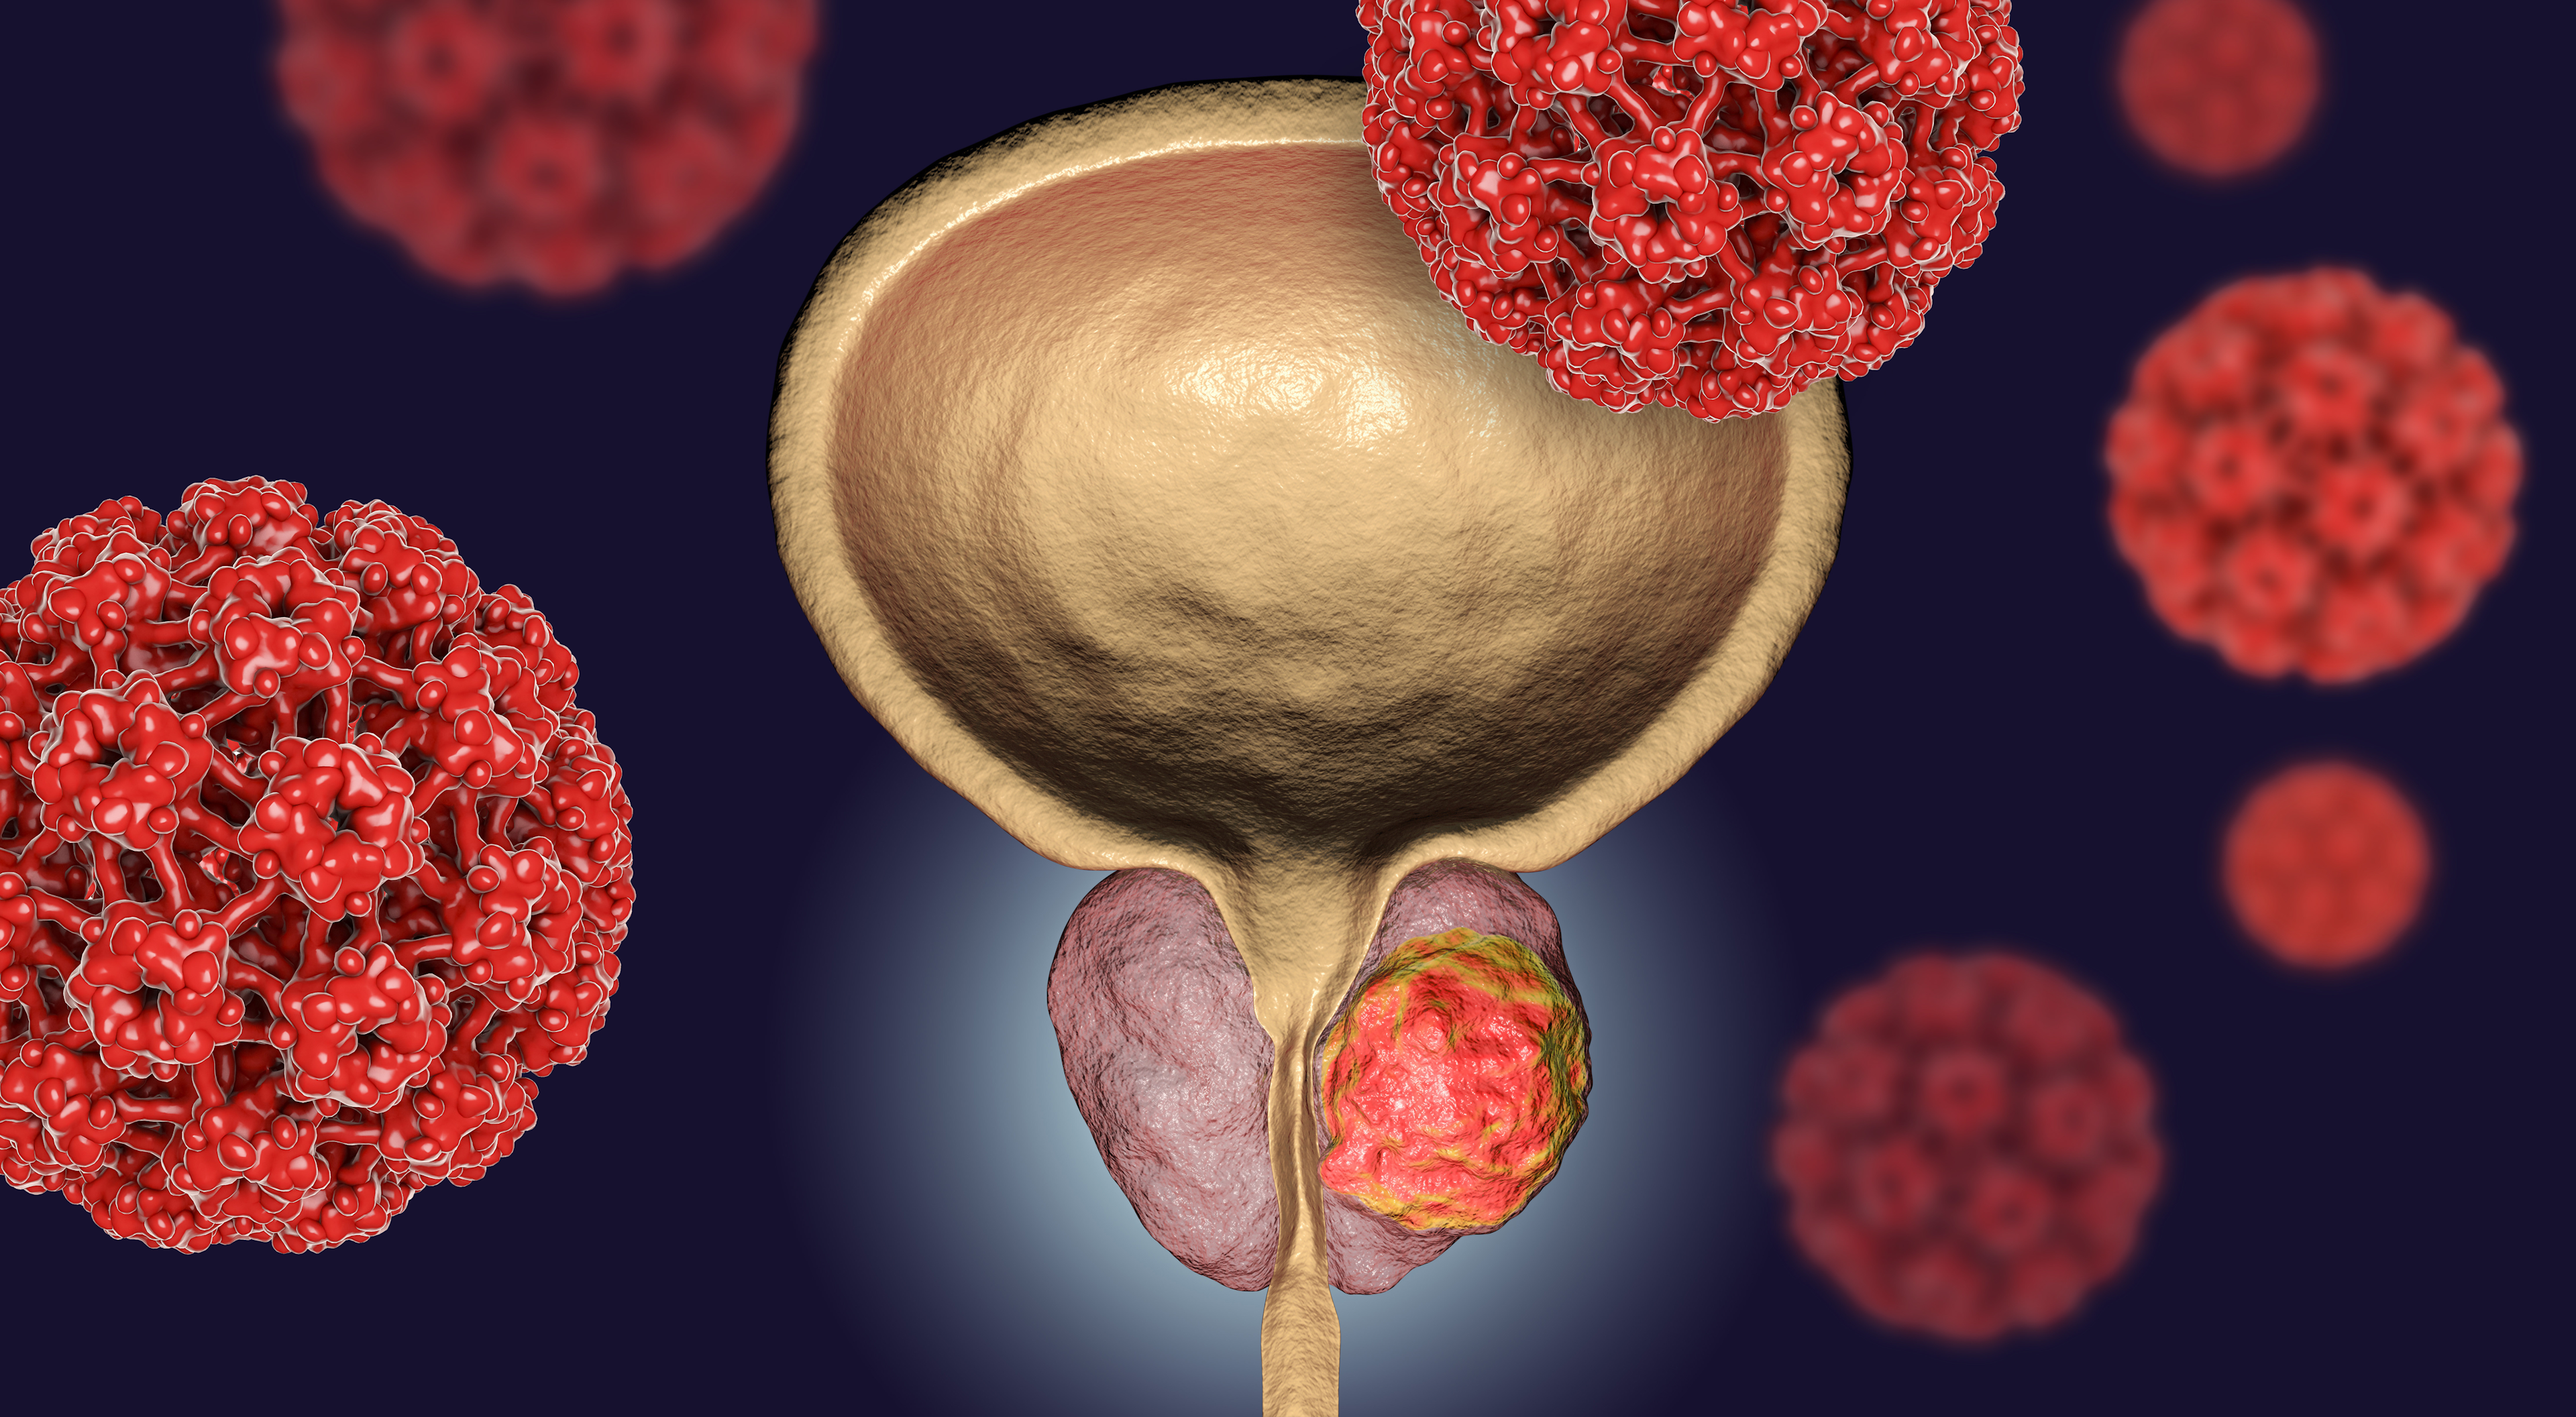 Knowledge of Risk Factors, Treatment Options Are Key to Managing Bladder Cancer